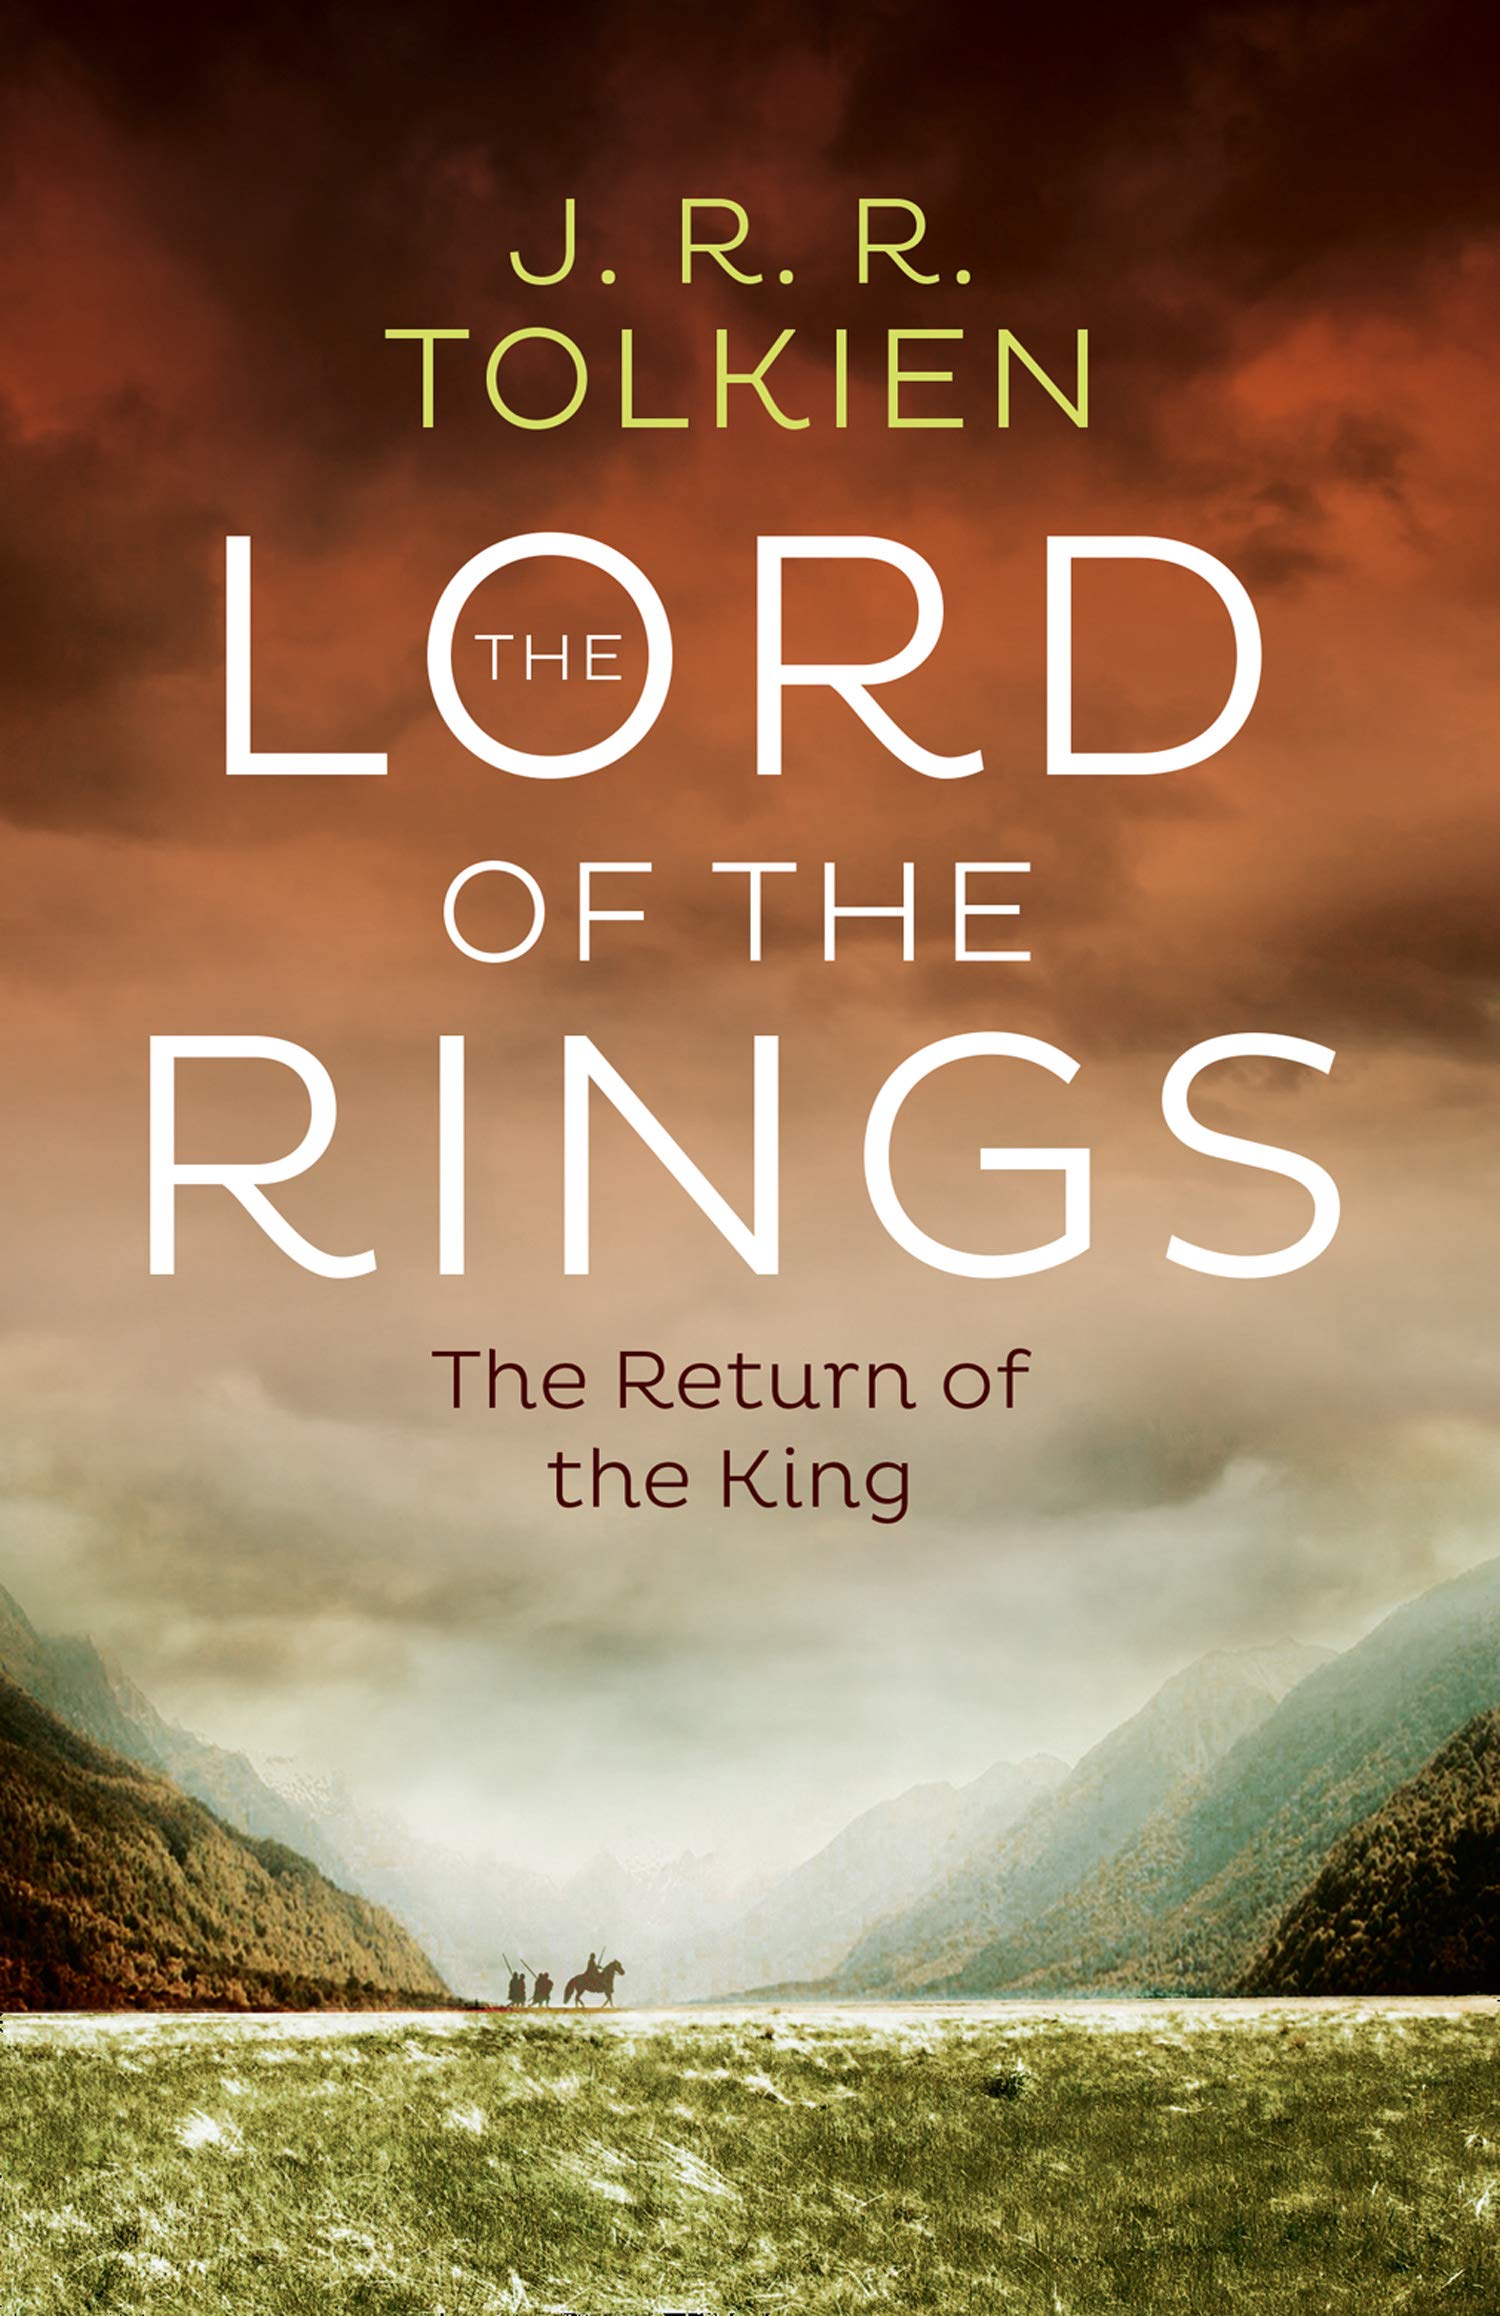 THE LORD OF THE RINGS (3) — THE RETURN OF THE KING